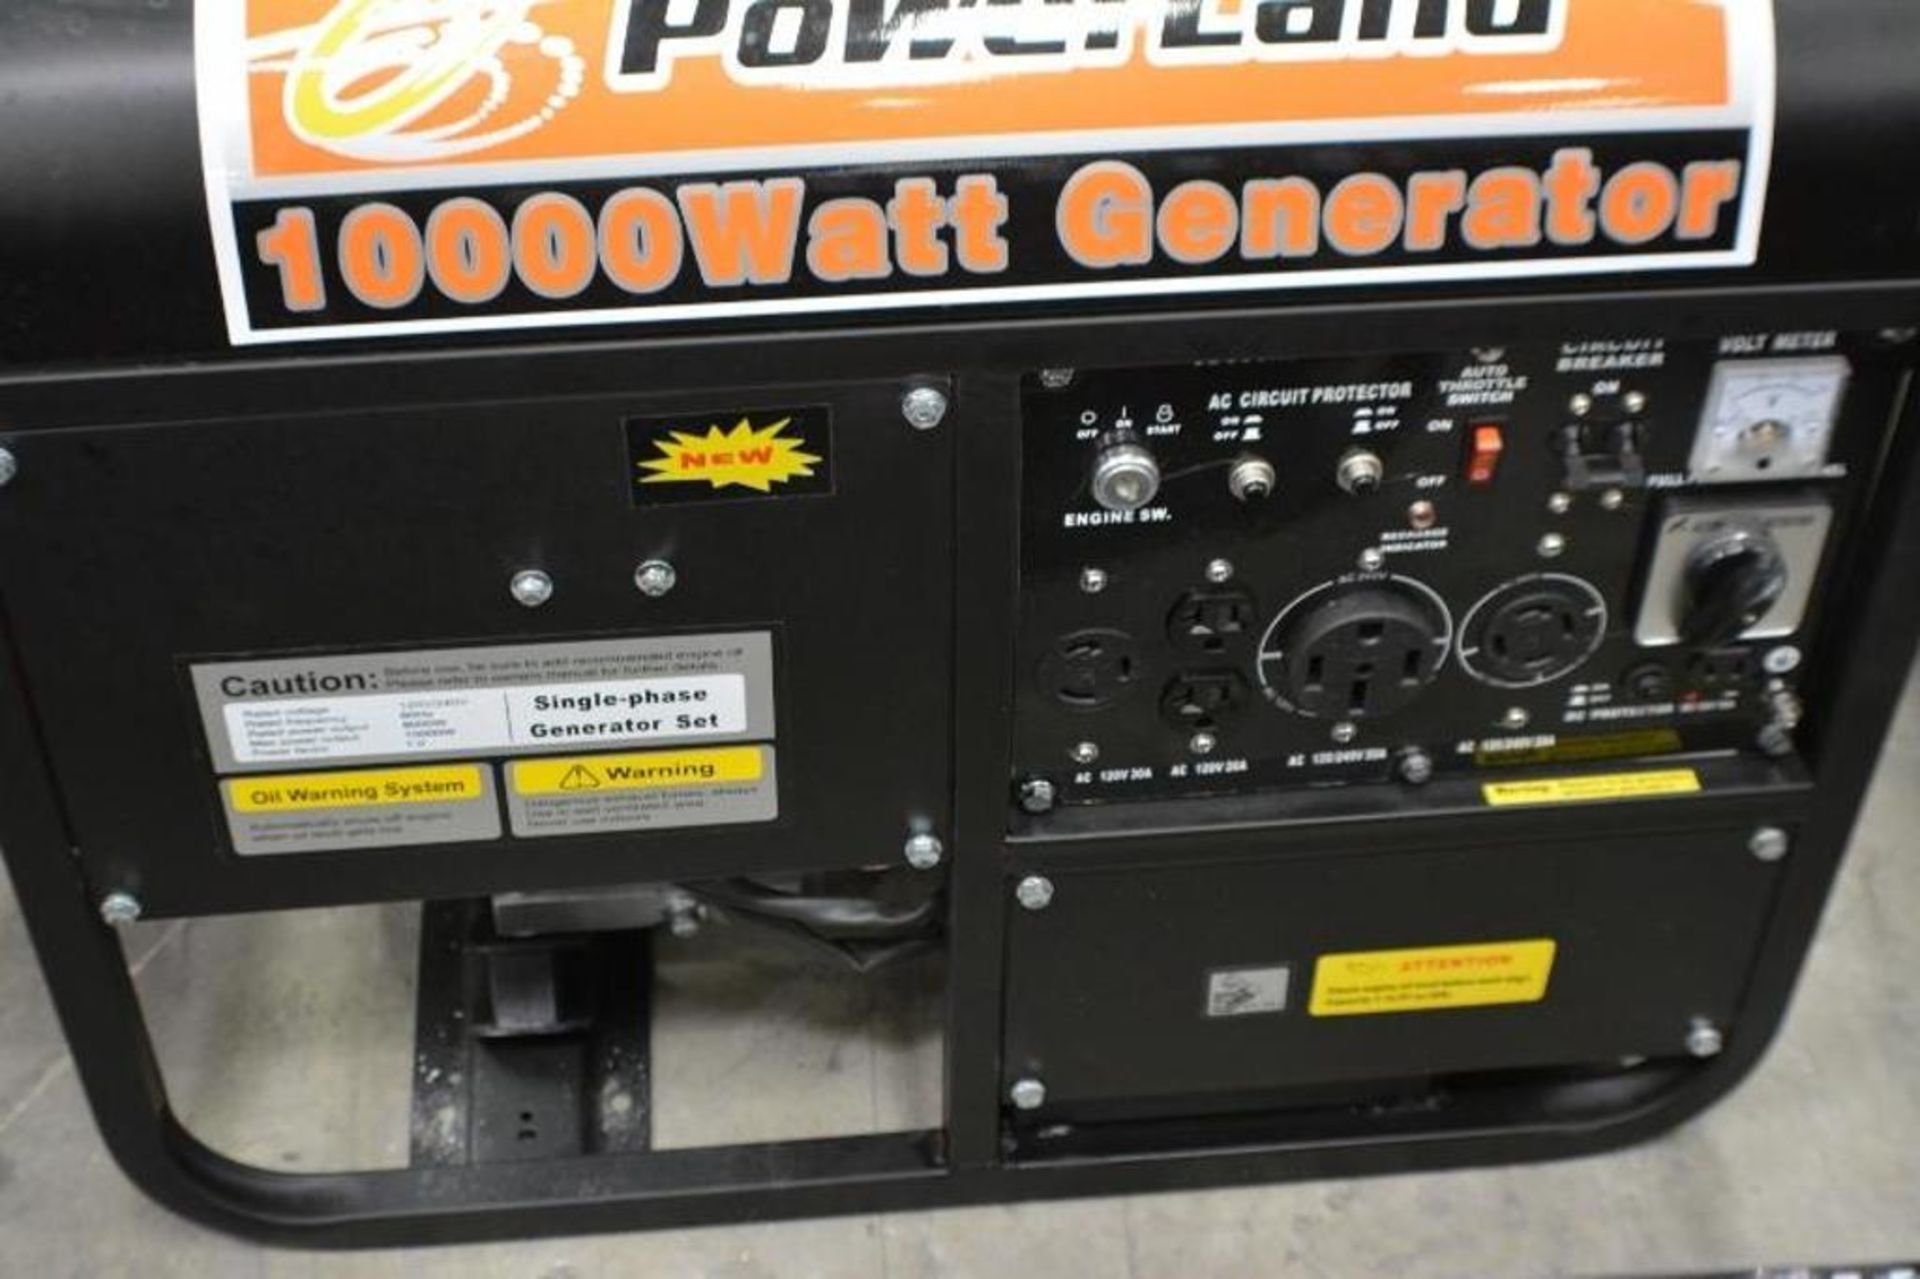 10000 Watts Gasoline Generator 16.0 HP with Electric Start Single Phase 120/240 Volts by Powerland - Image 2 of 5